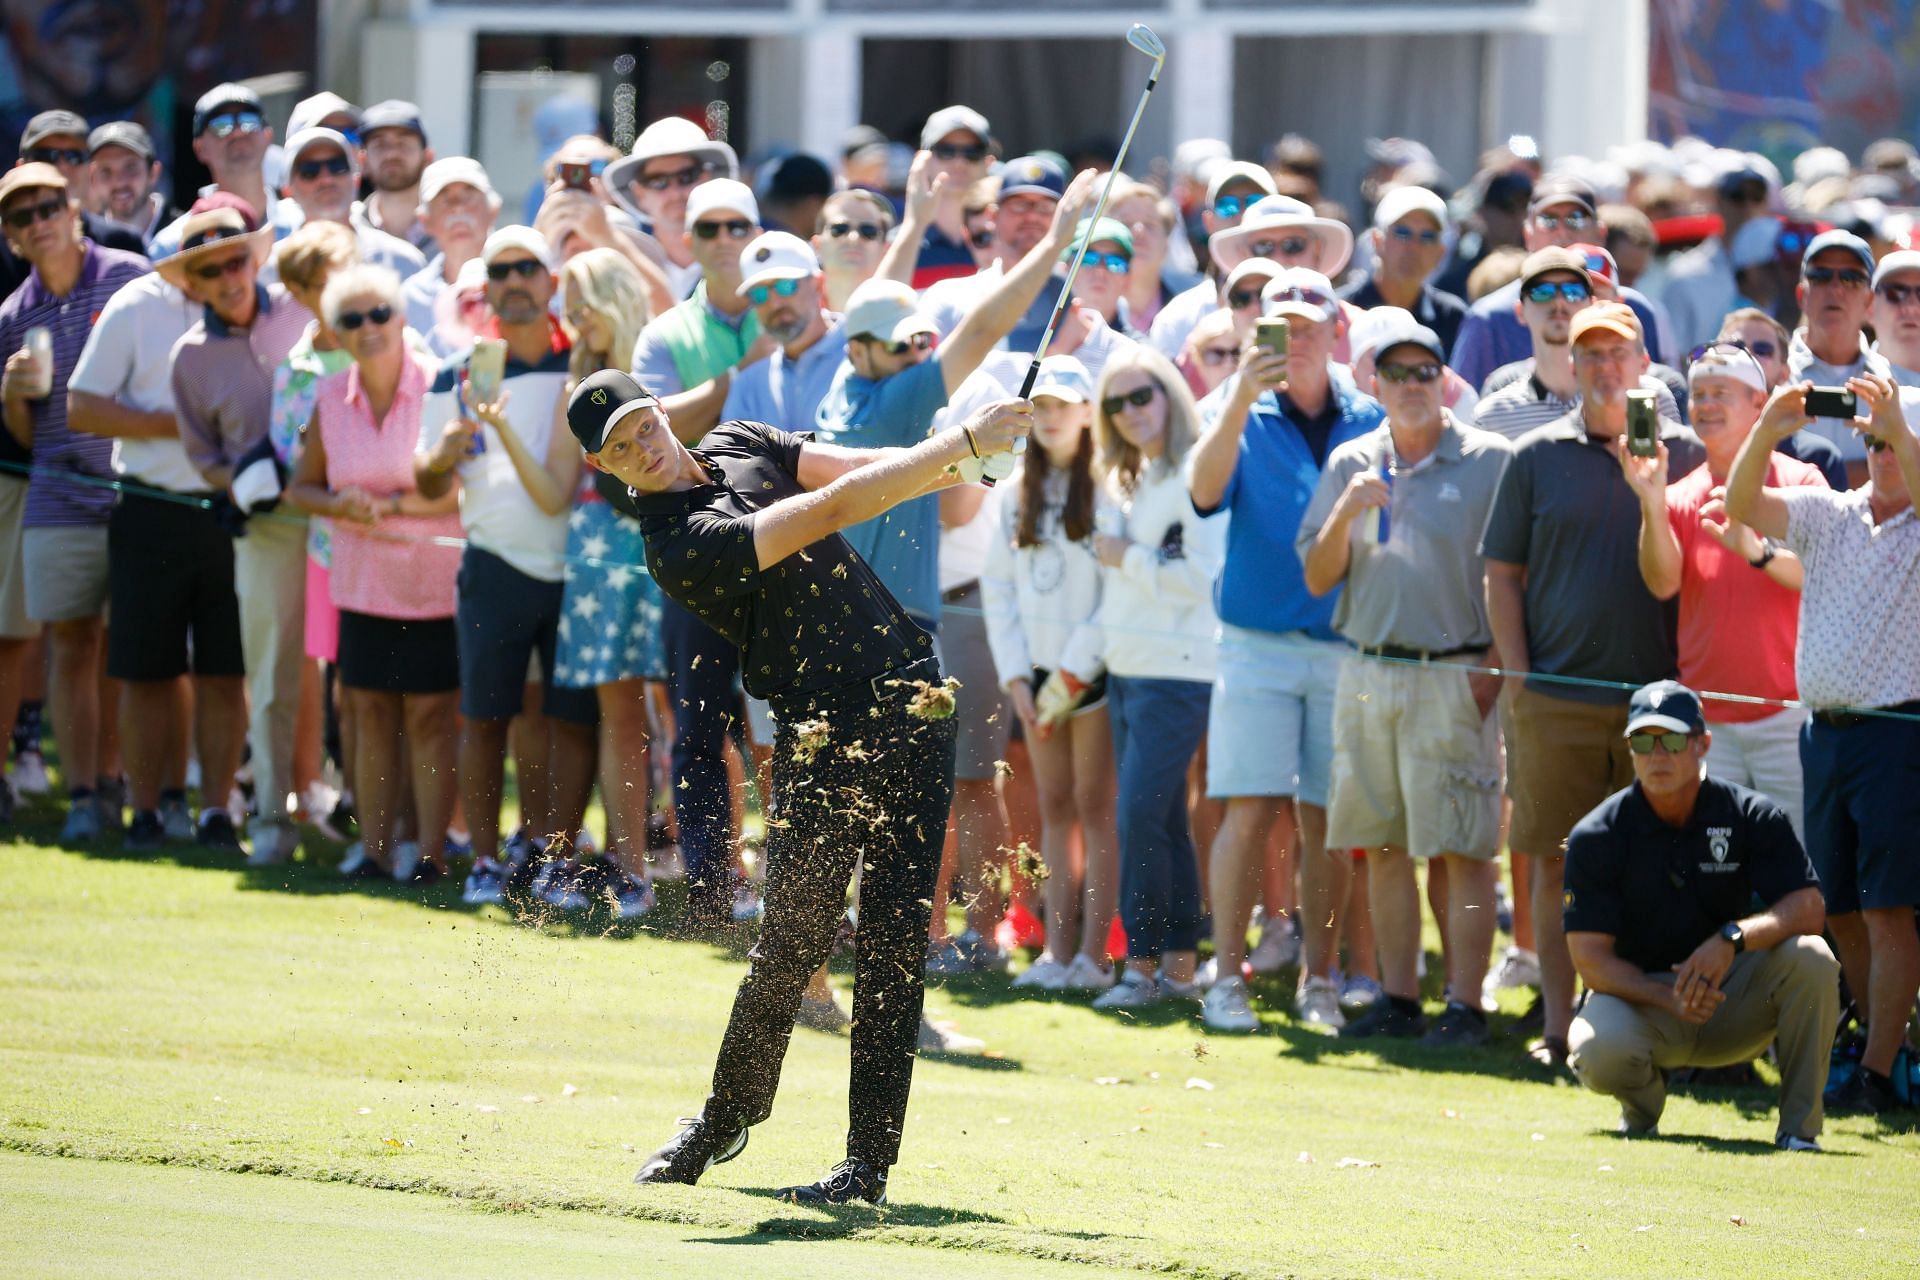 Cam Davis of Australia and the international team play an approach shot on the third hole as fans watch during day two of the 2022 Presidents Cup at Friday's four-ball games (Image via Jared C. Tilton/Getty Images).